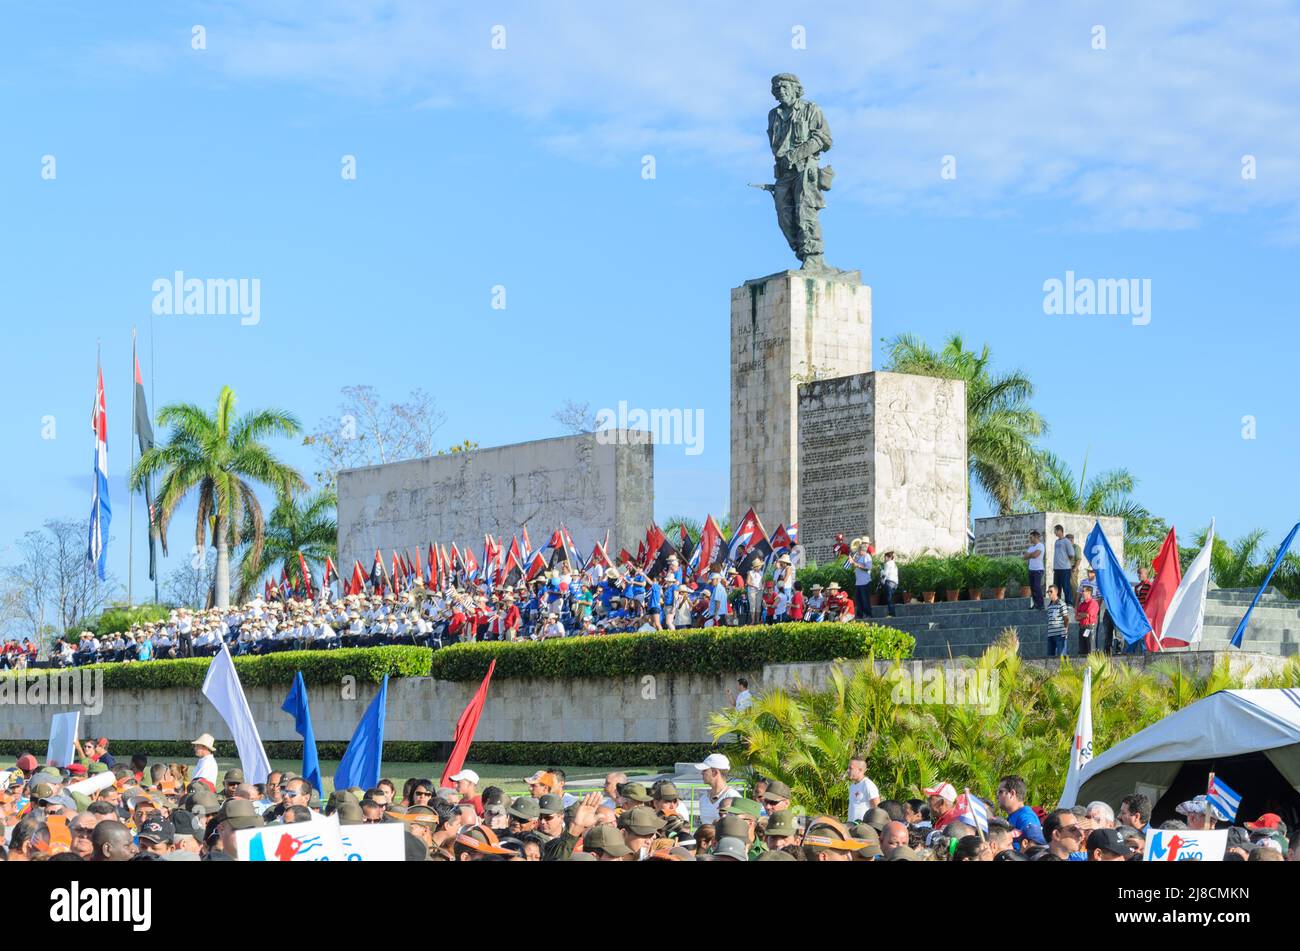 Members of the FAR (Fuerzas Armadas Revolucionarias) marching. The traditional May Day or Workers Day celebrations are held annually in the Che Guevar Stock Photo